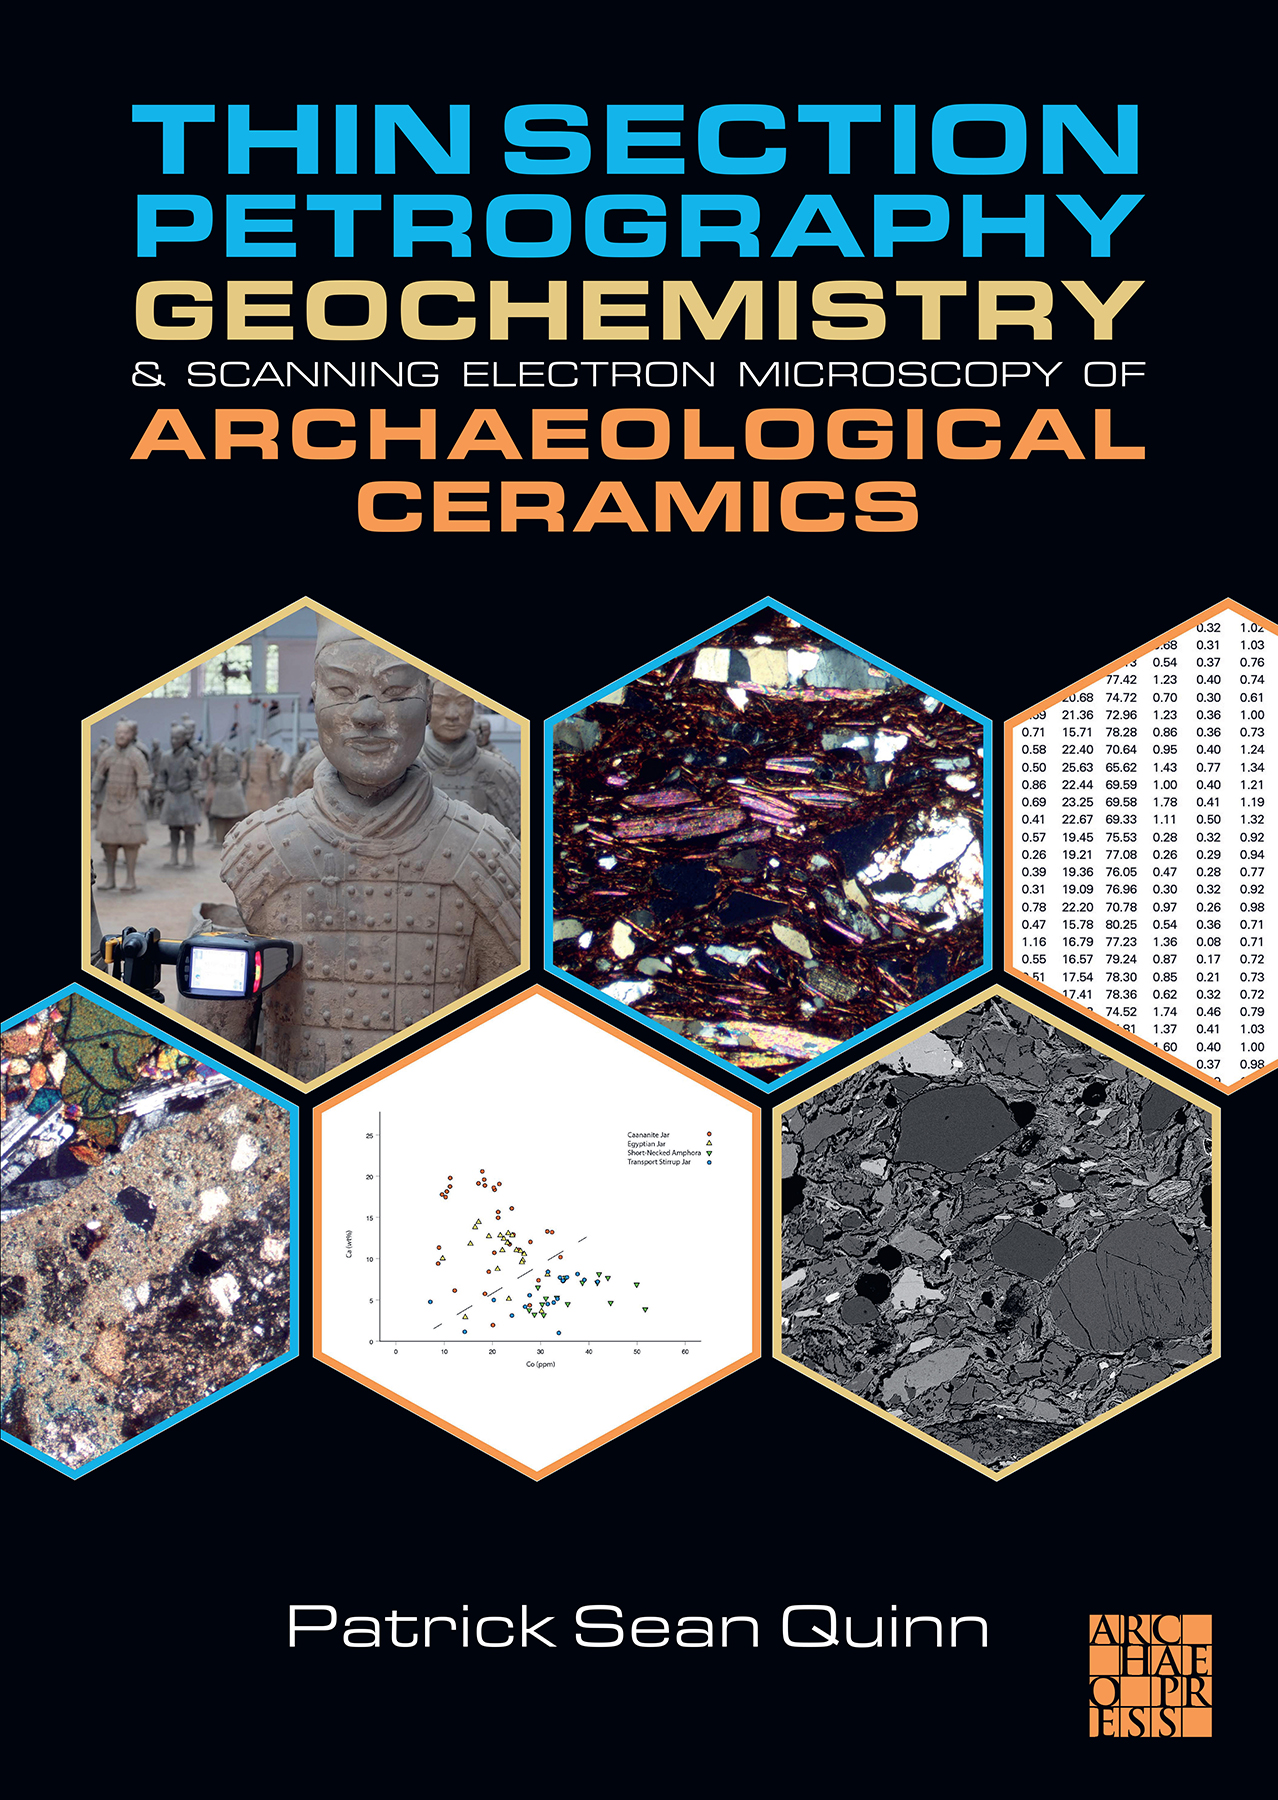 Thin Section Petrography, Geochemistry and Scanning Electron Microscopy of Archaeological Ceramics, 2022, 466 p.